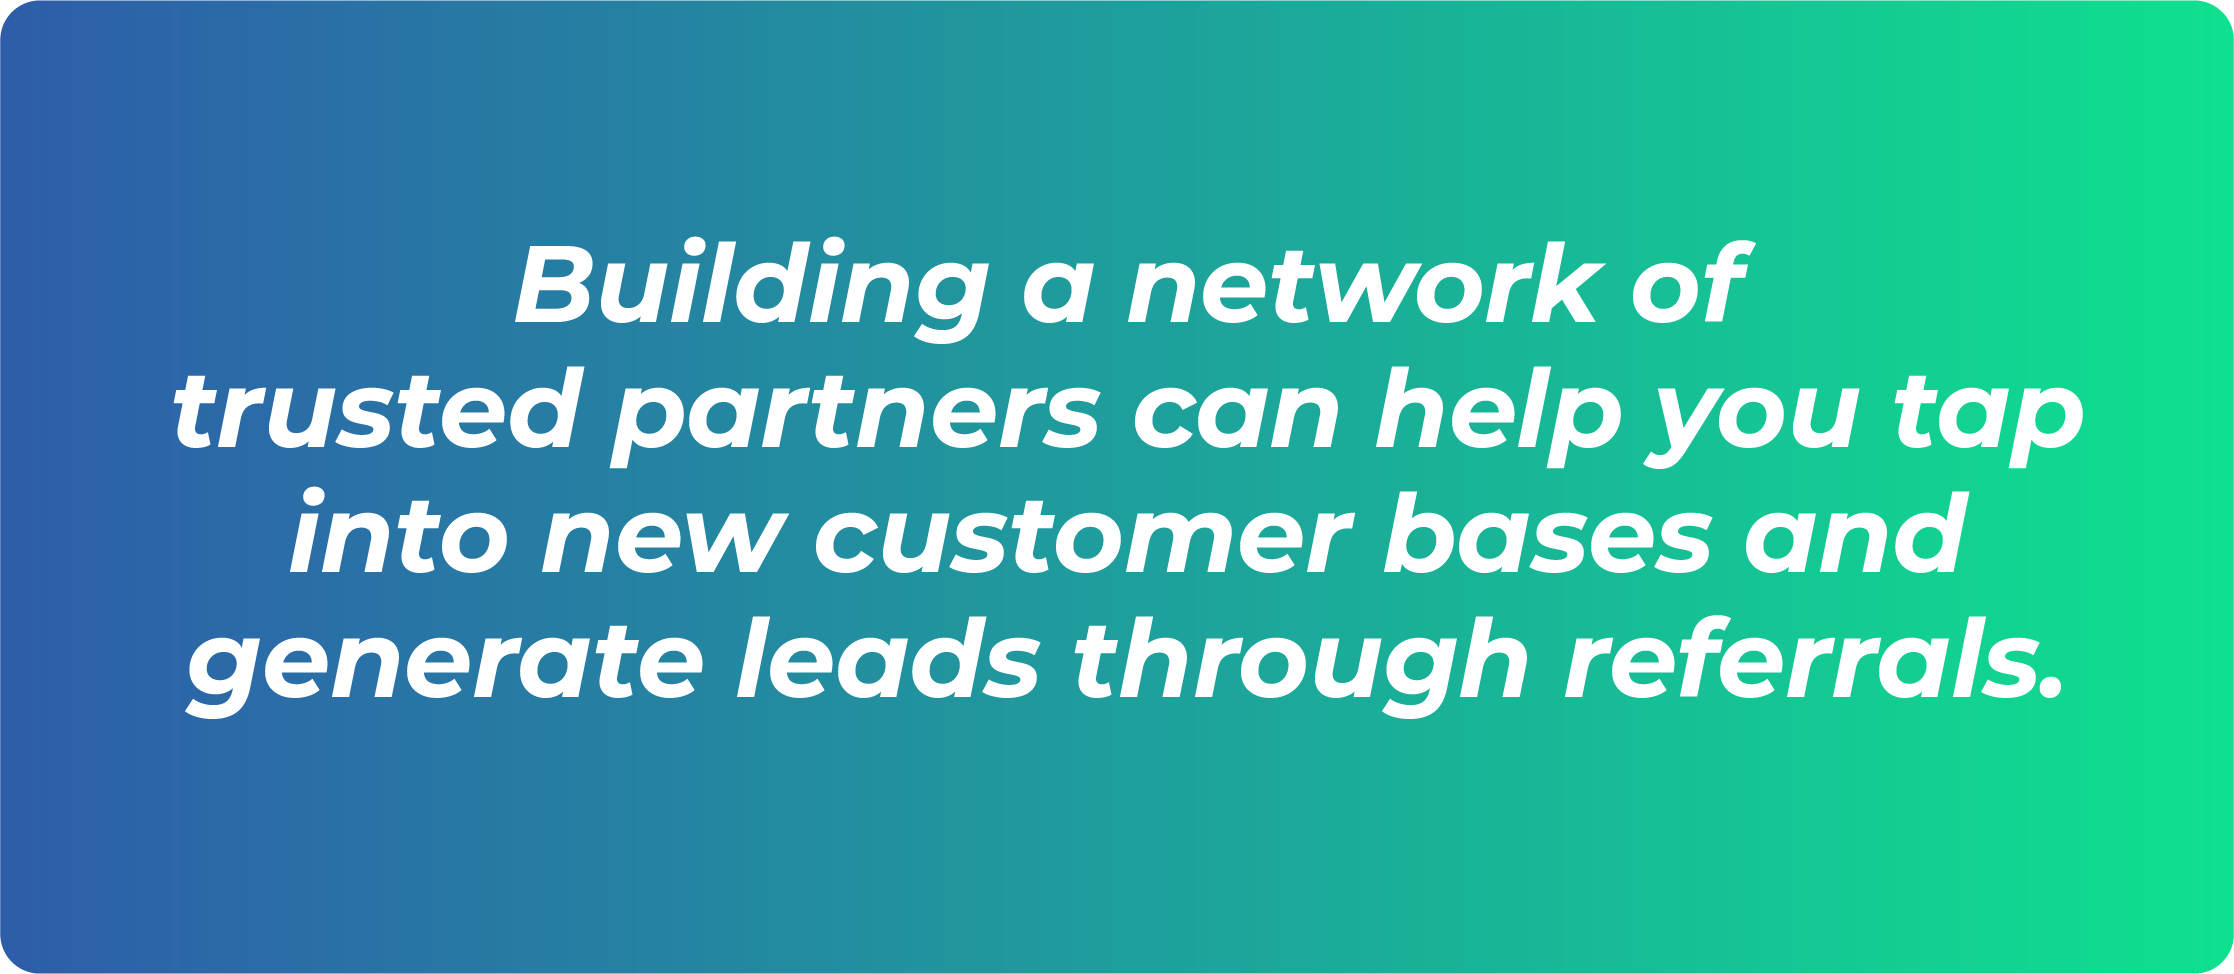 Building a network of trusted partners can help you tap into new customer bases and generate leads through referrals.